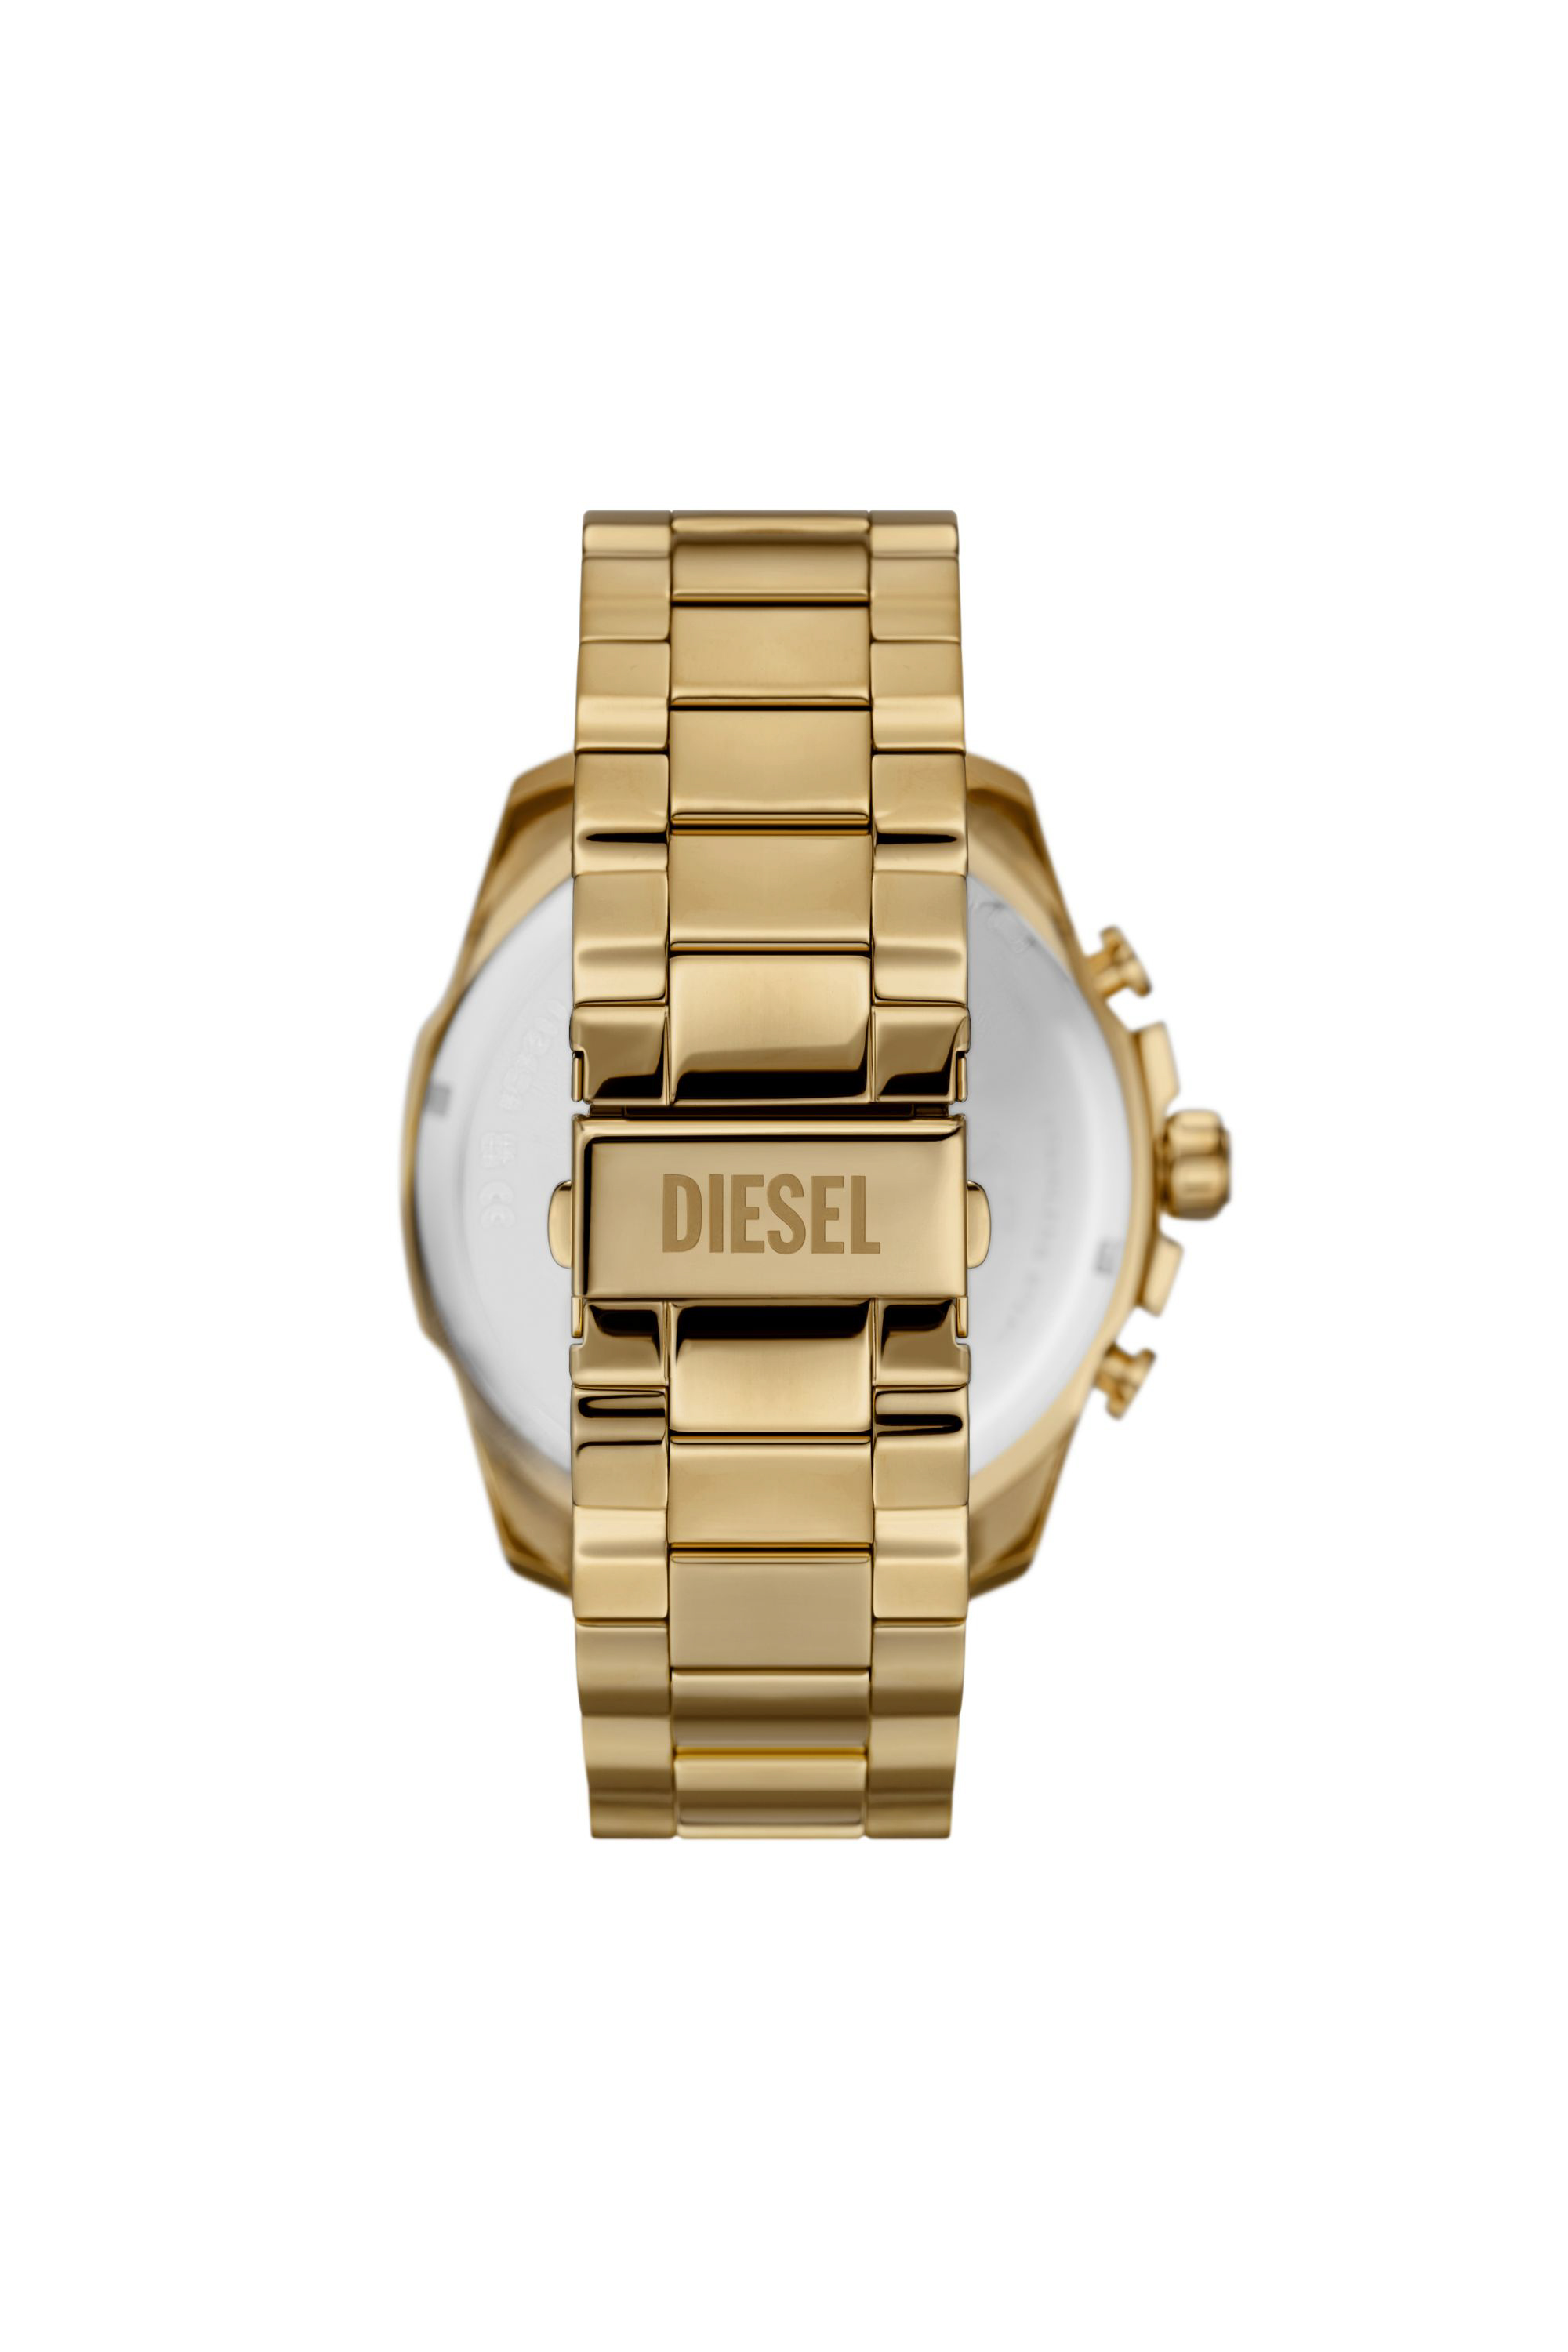 Diesel - DZ4662, Male Mega Chief chronograph gold-tone stainless steel watch in ゴールド - Image 2